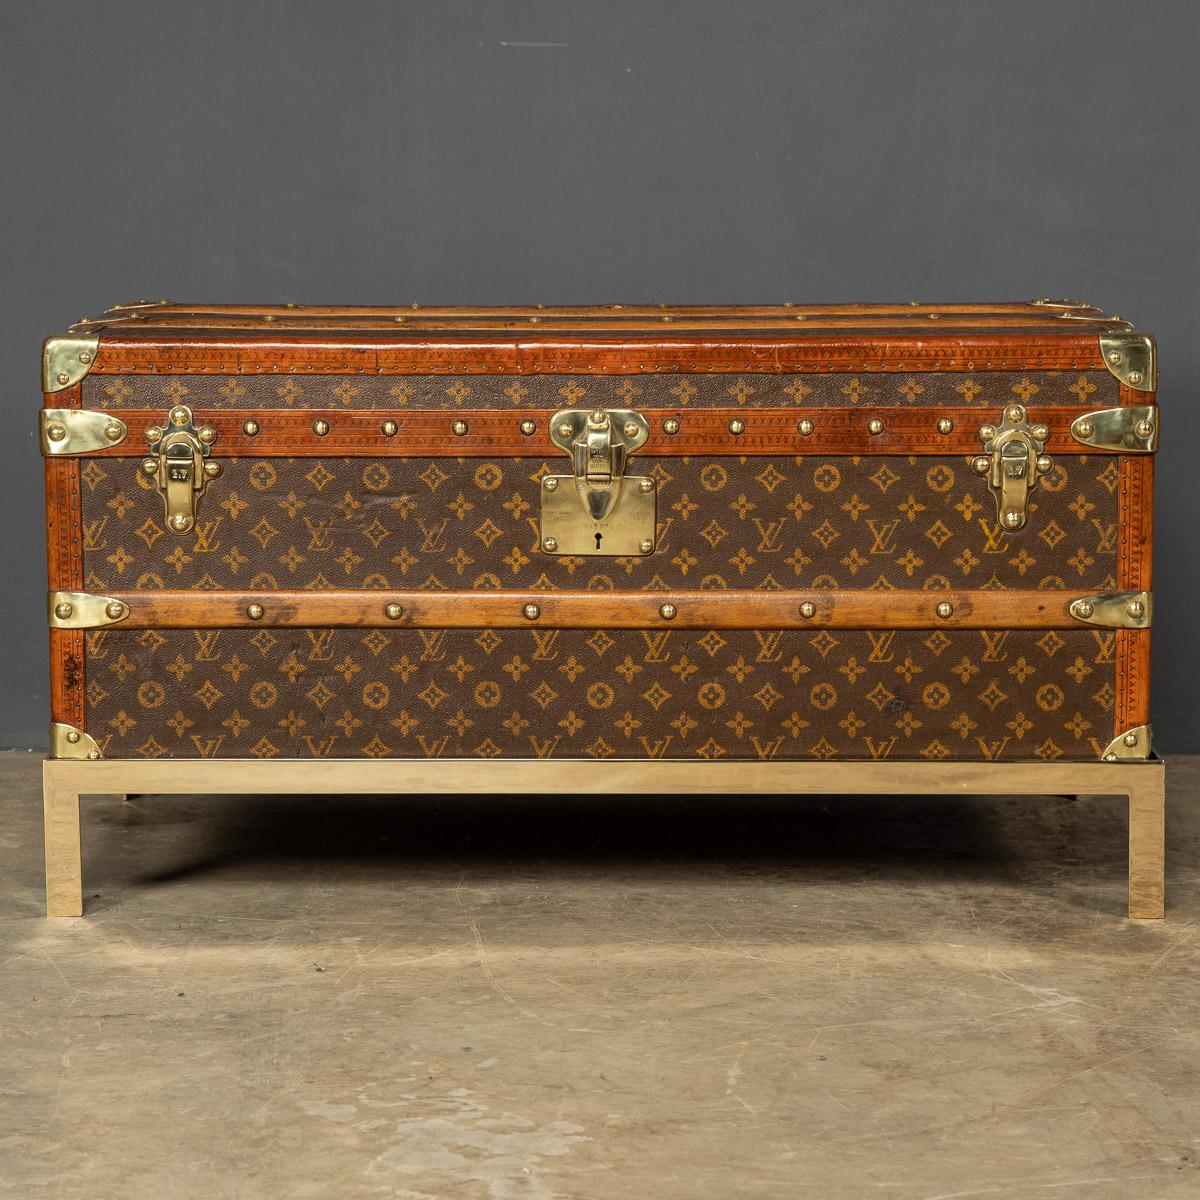 Antique early 20th century Louis Vuitton trunk covered in the world famous LV monogrammed canvas, with its lozine borders and brass fitting this trunk would have been the top of the line even at the time of purchase over 100 years ago, comes with a